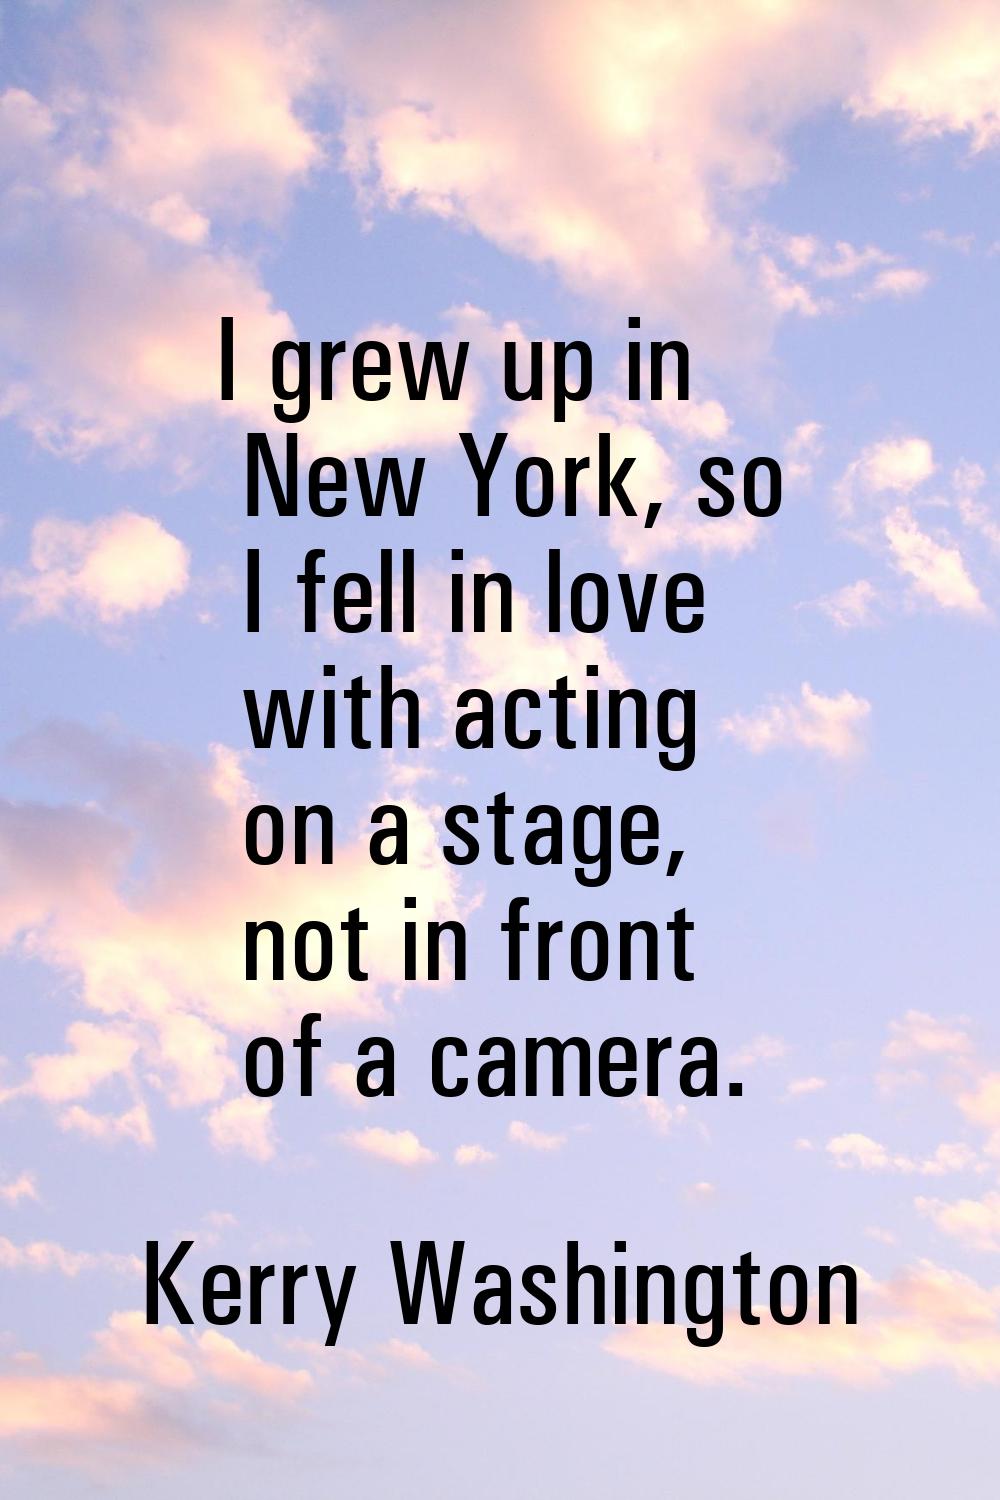 I grew up in New York, so I fell in love with acting on a stage, not in front of a camera.